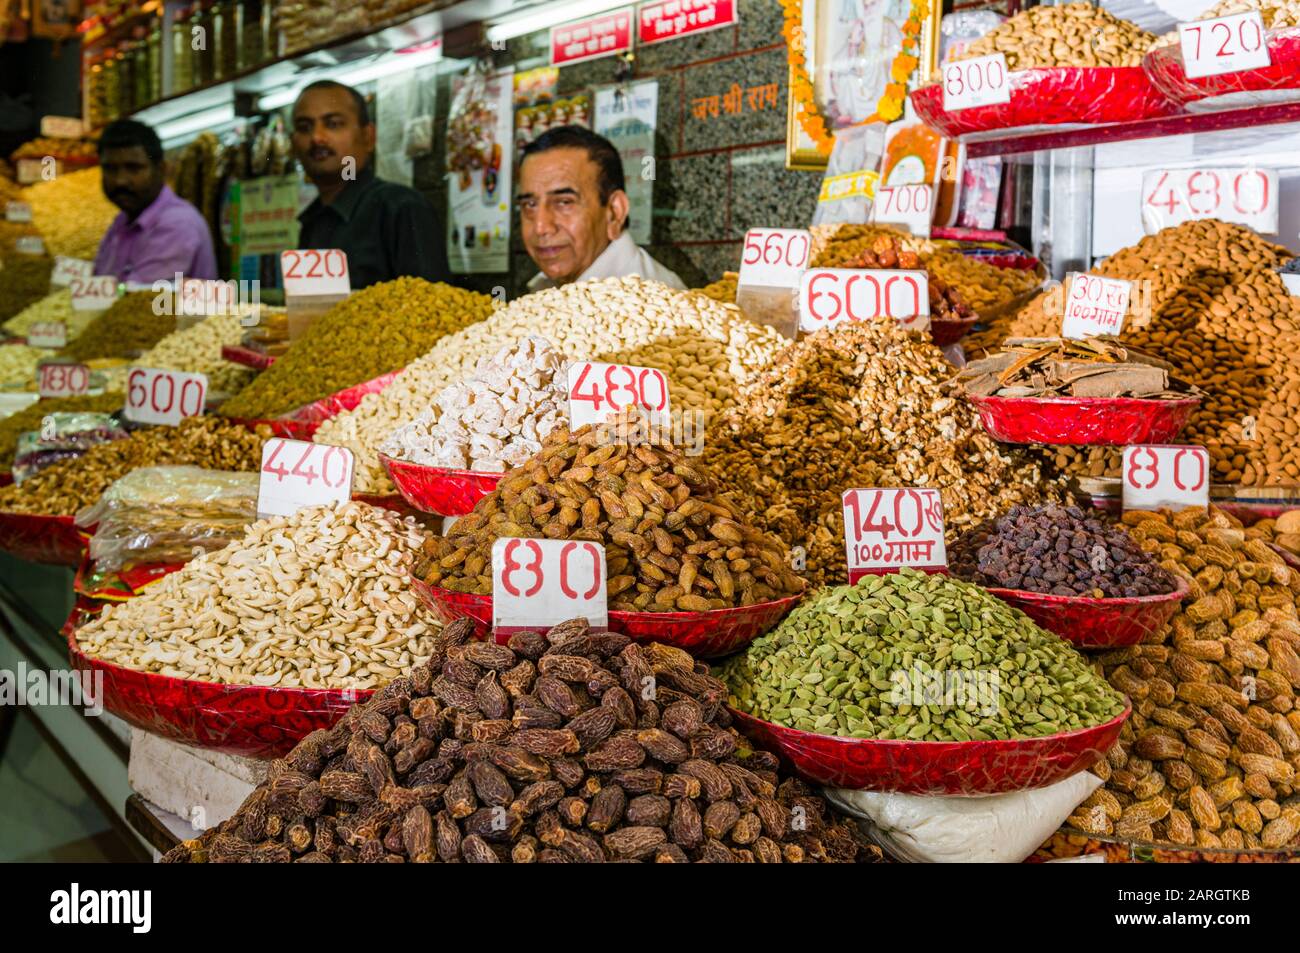 A salesman is selling nuts and many different spices in his shop in the the spice market in Old Delhi Stock Photo